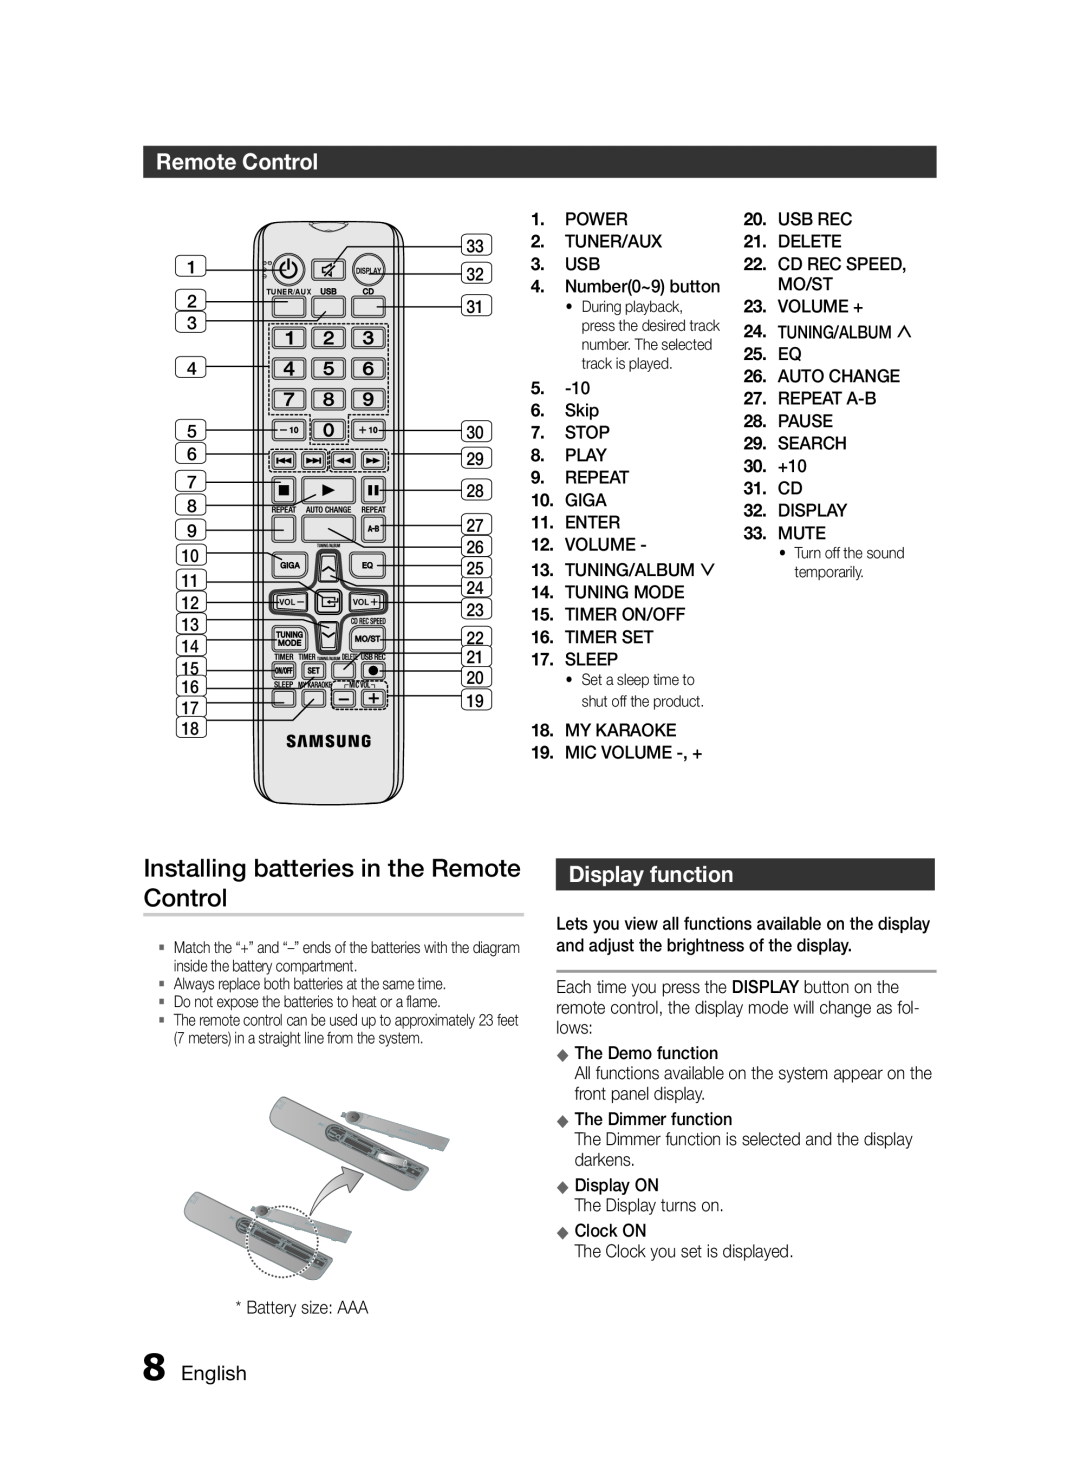 Samsung MXF630BZA user manual Installing batteries in the Remote Control, Display function, English 